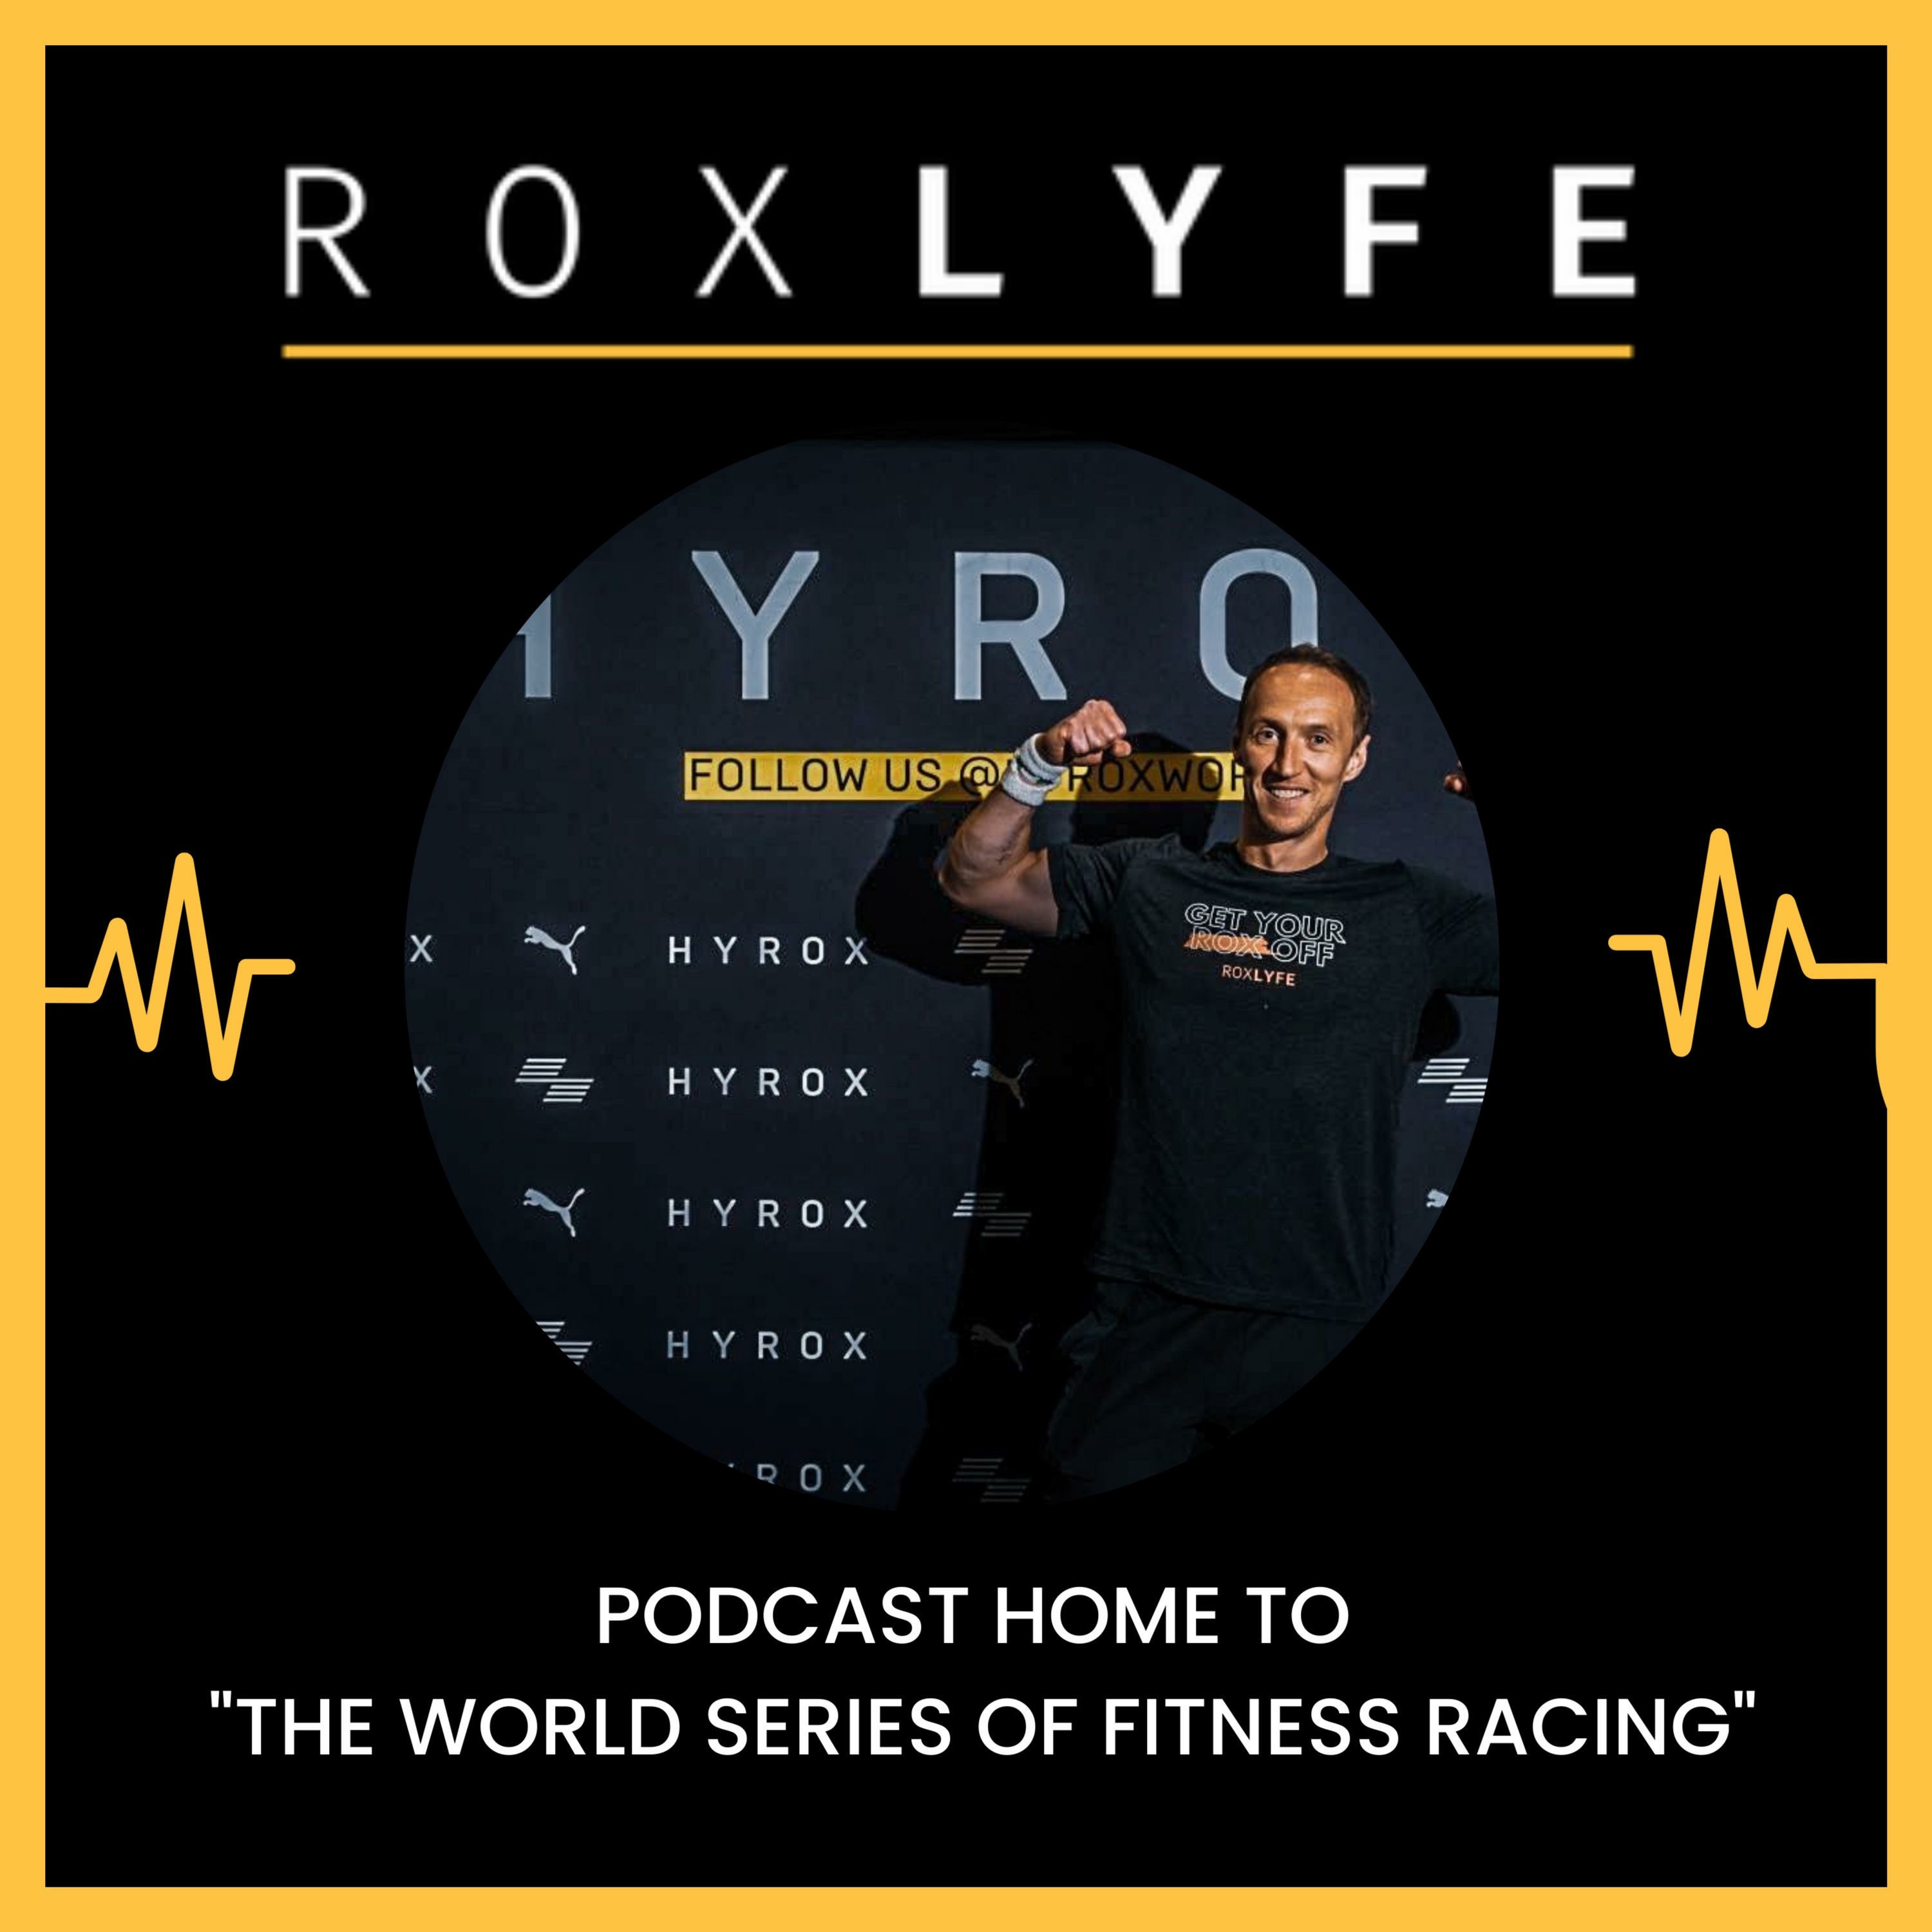 HYROX Birmingham Race Results and Review Rox Lyfe Podcast Podtail